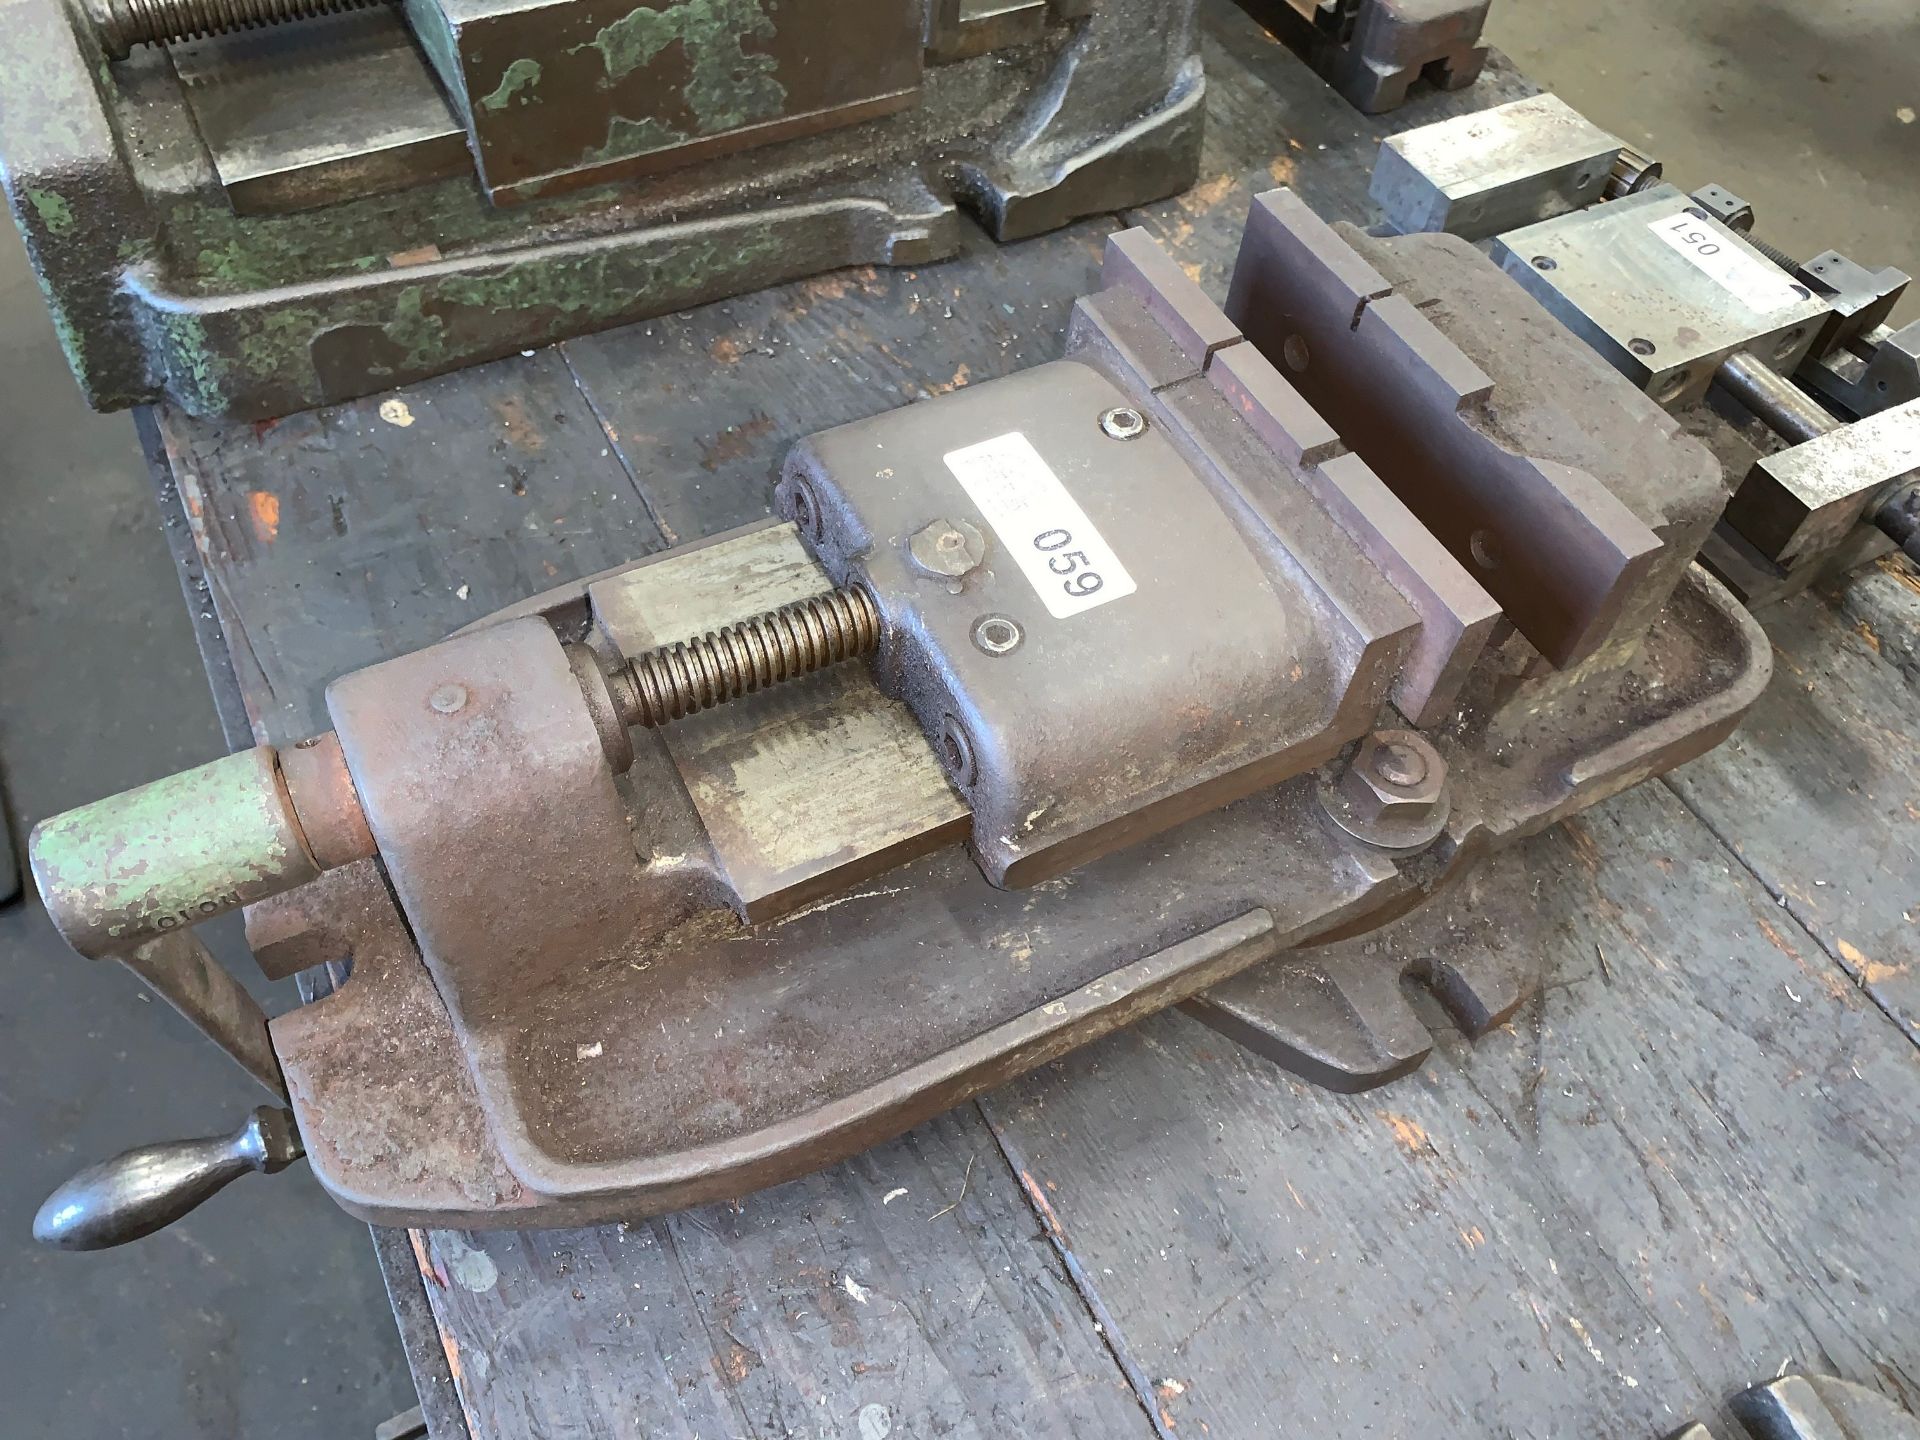 6" Machine Vise with Swivel Base (Buyer is Responsible for ALL Packaging, Palletizing, Crating,